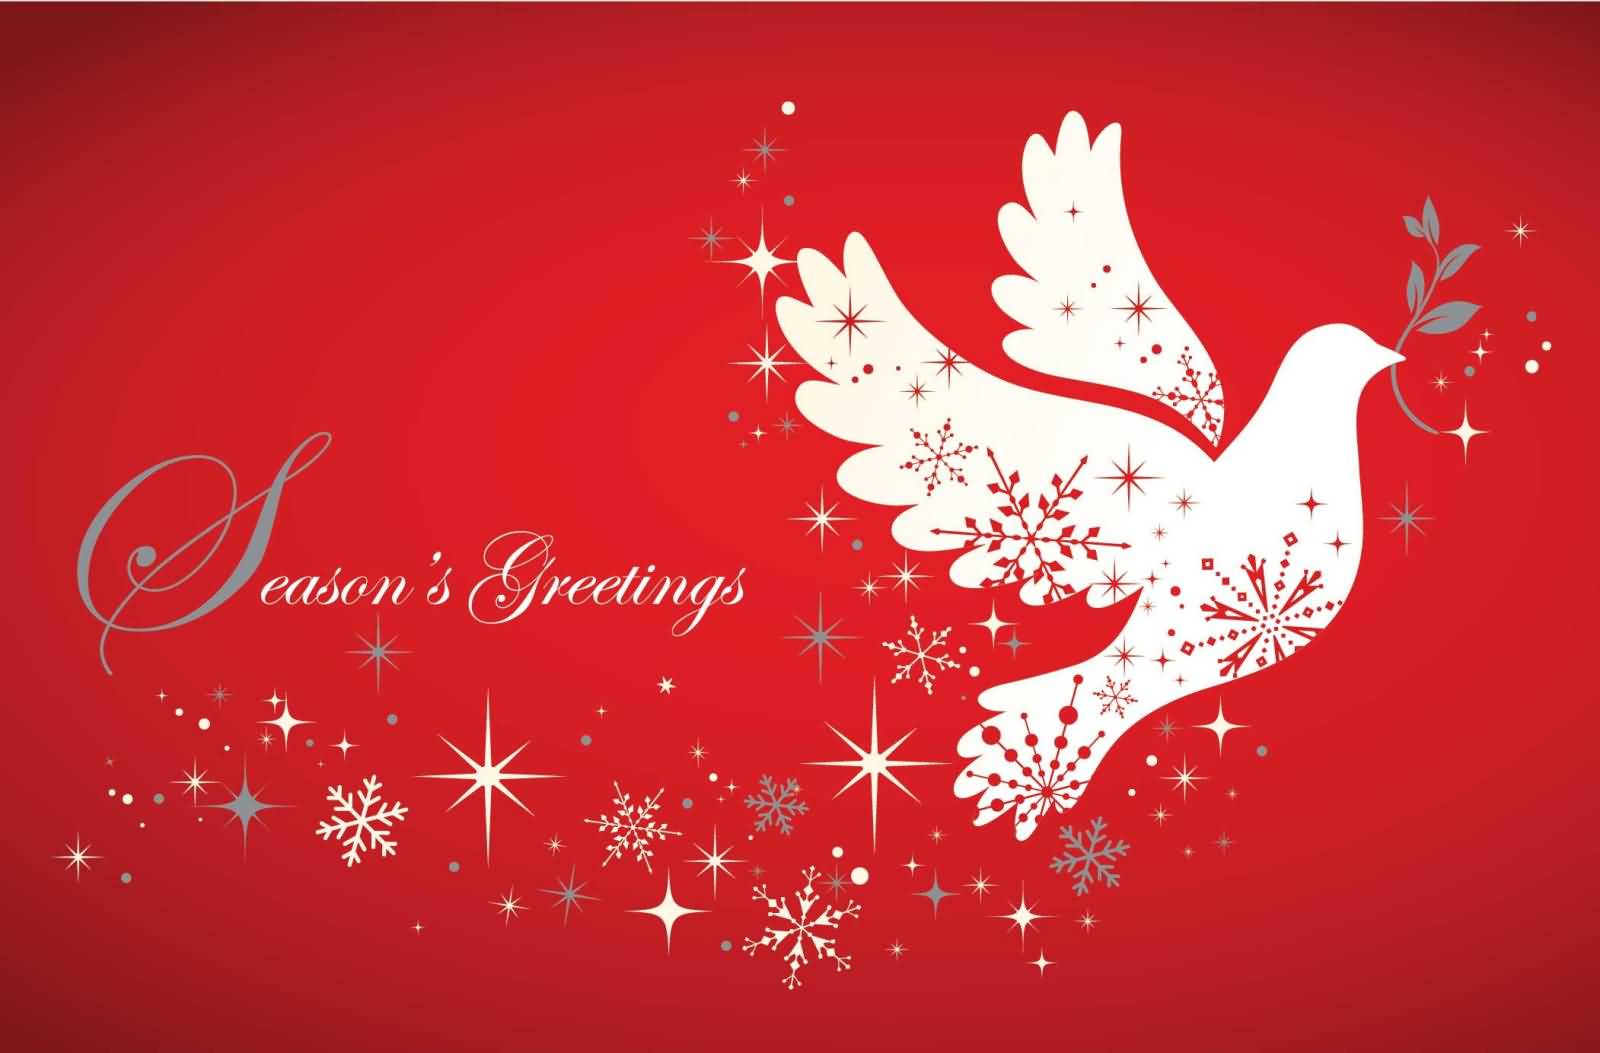 Season’s Greetings Flying Dove Picture